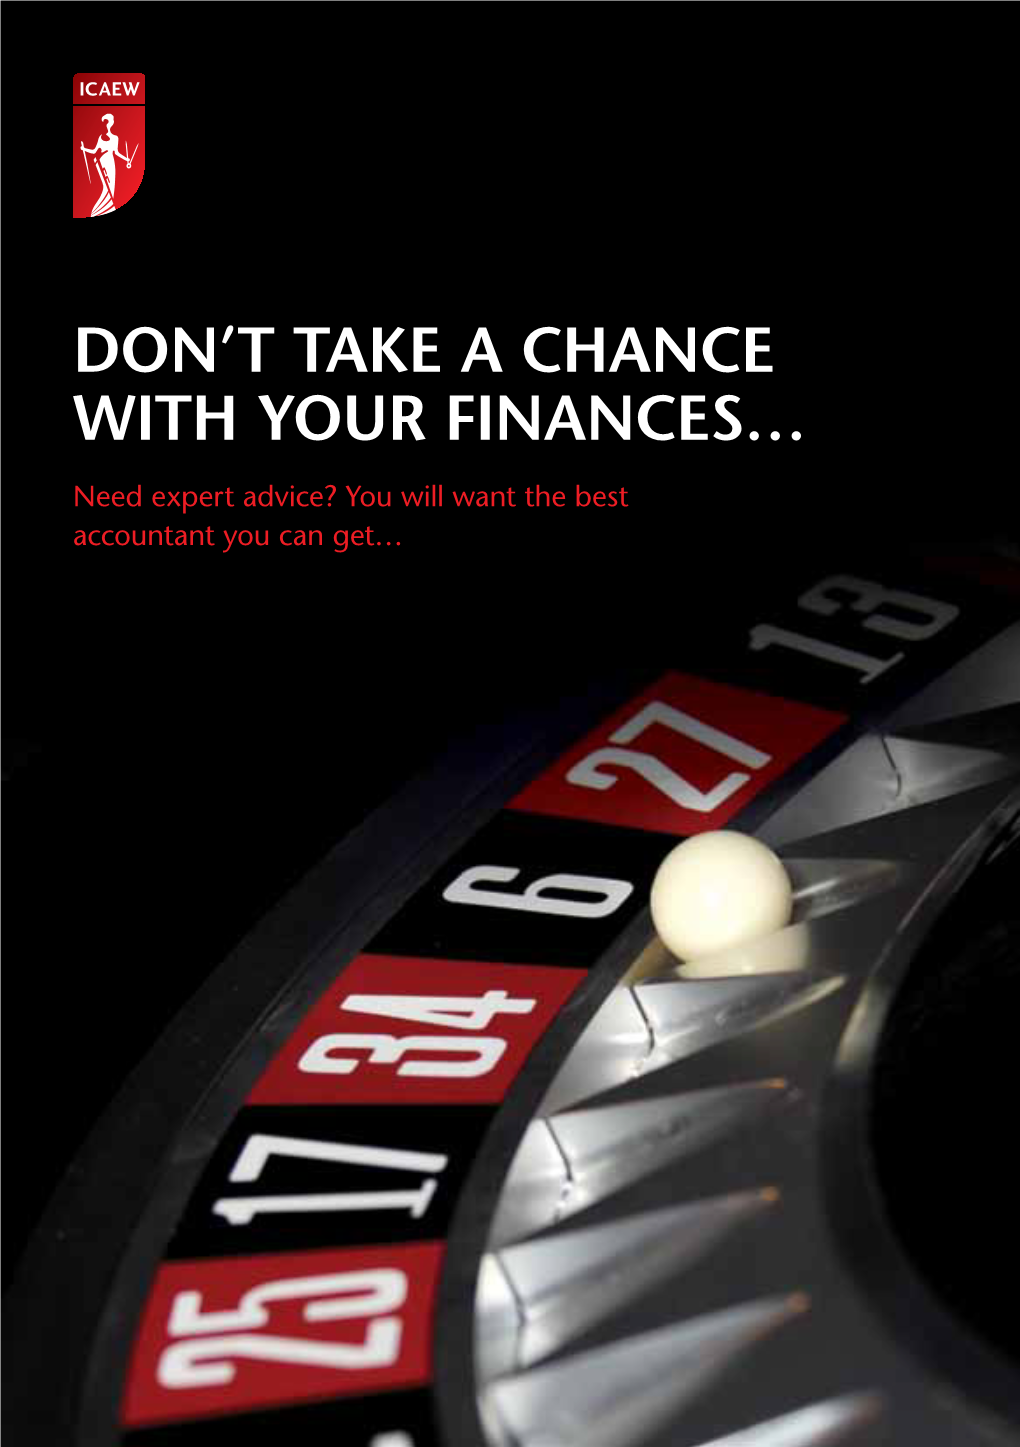 ICAEW Chartered Accountants Are Financial Experts with the Knowledge, Initiative and Judgement You Can Trust